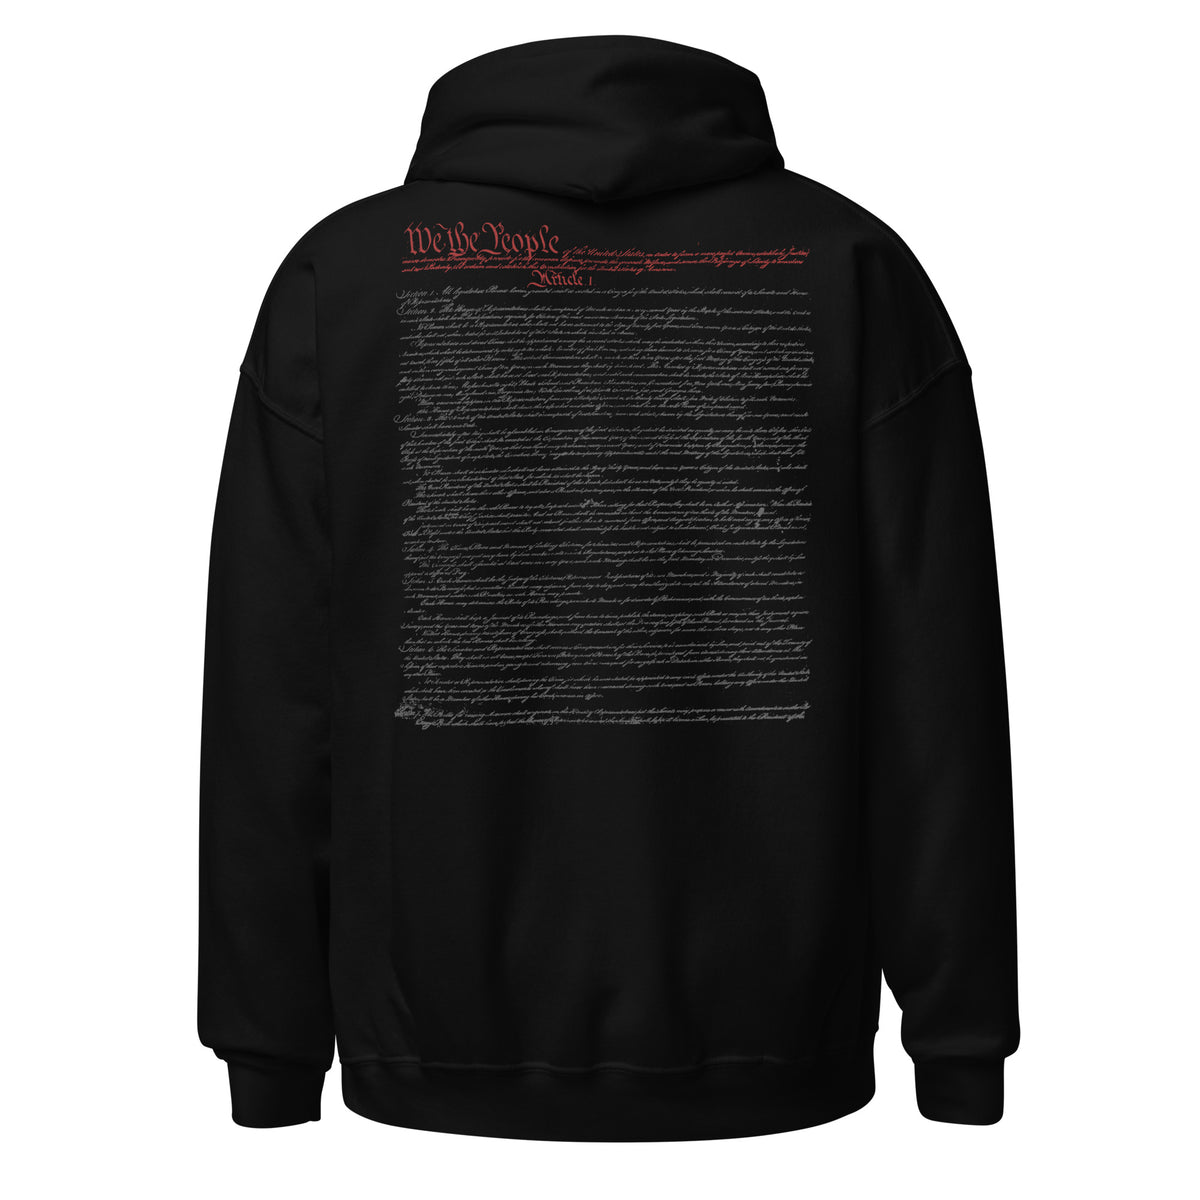 The Constitution Onyx Hoodie